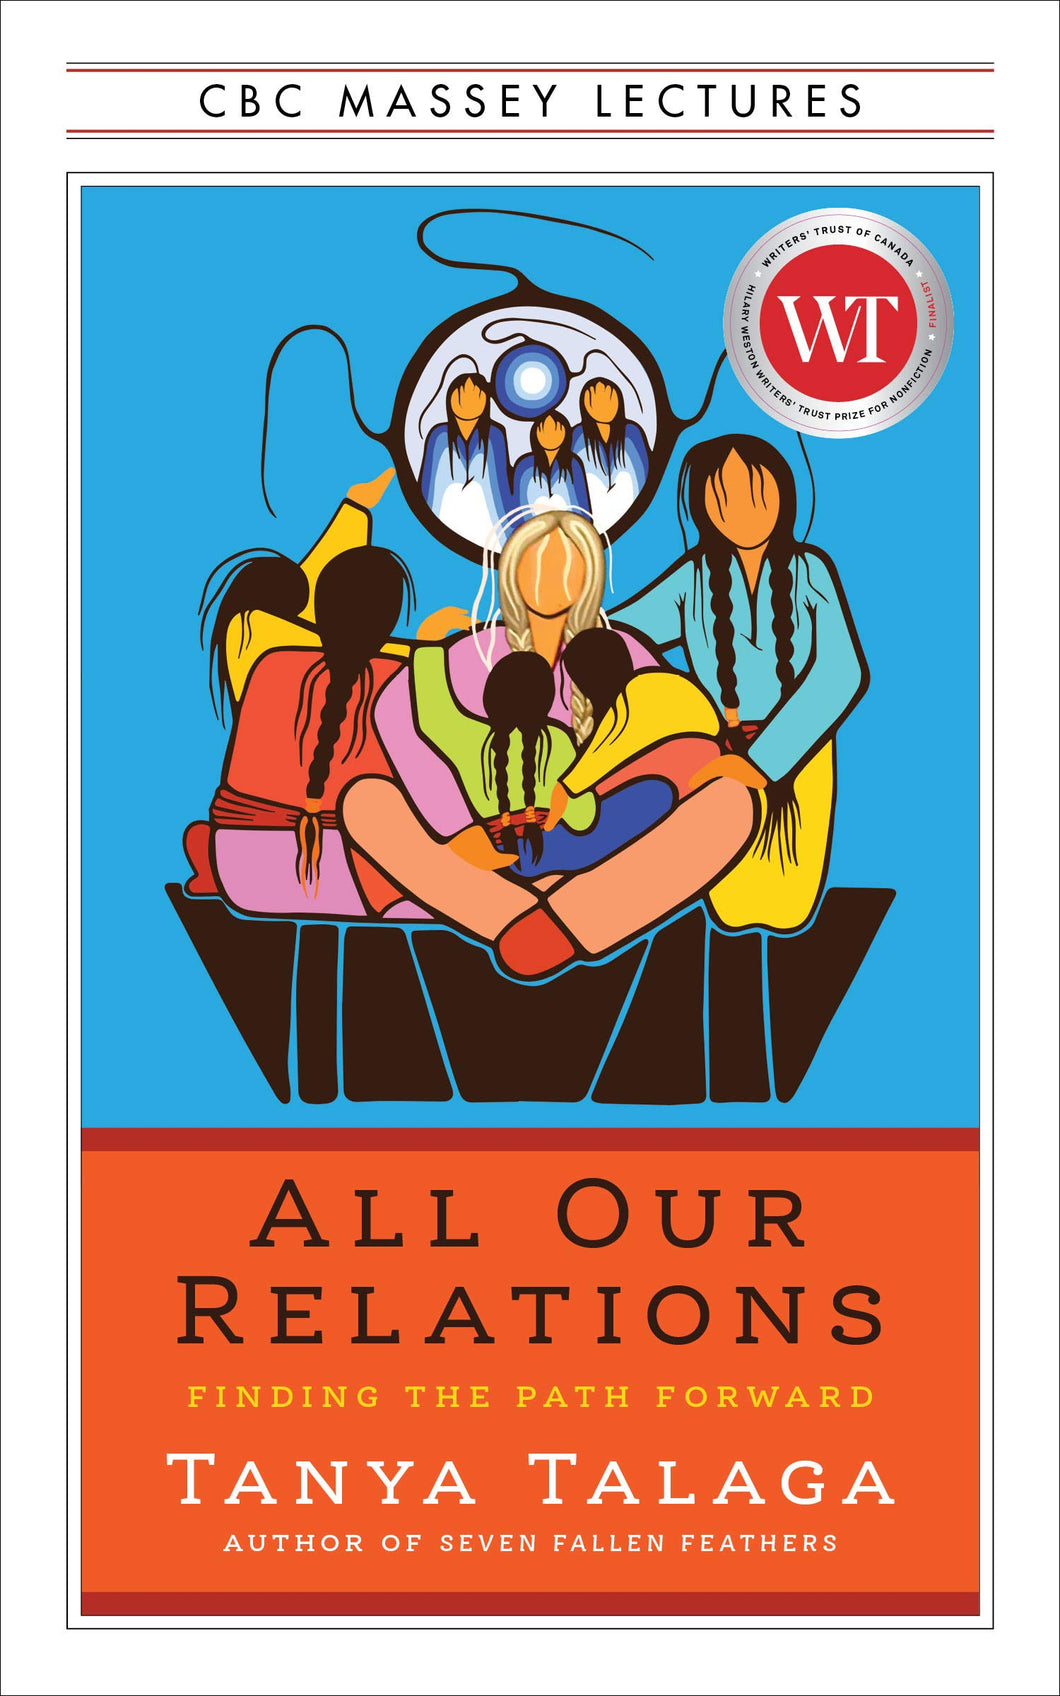 All Our Relations: Finding The Path Forward [Tanya Talaga]